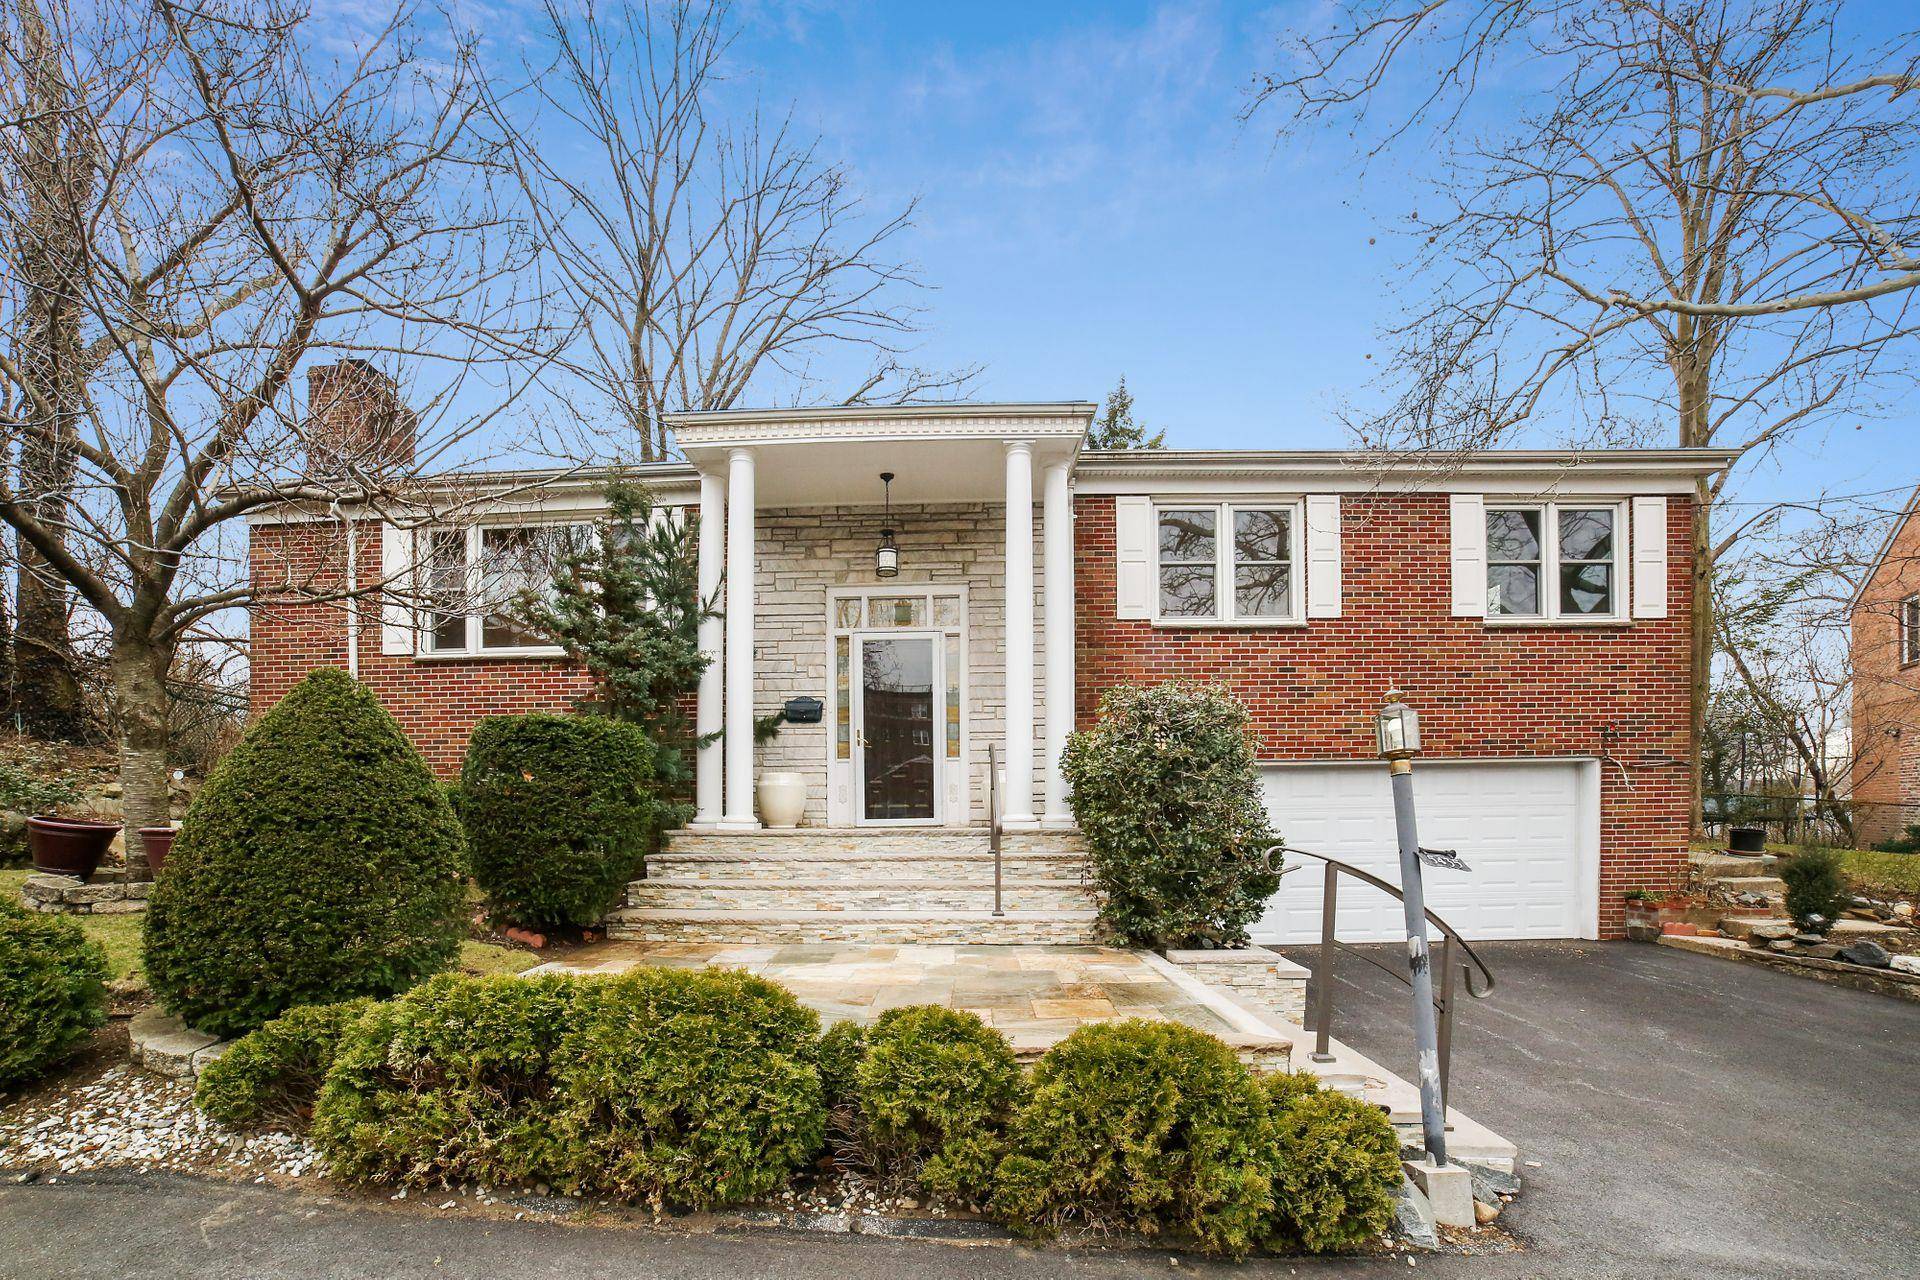 Lovely brick split level one family home in the estate section of Riverdale.